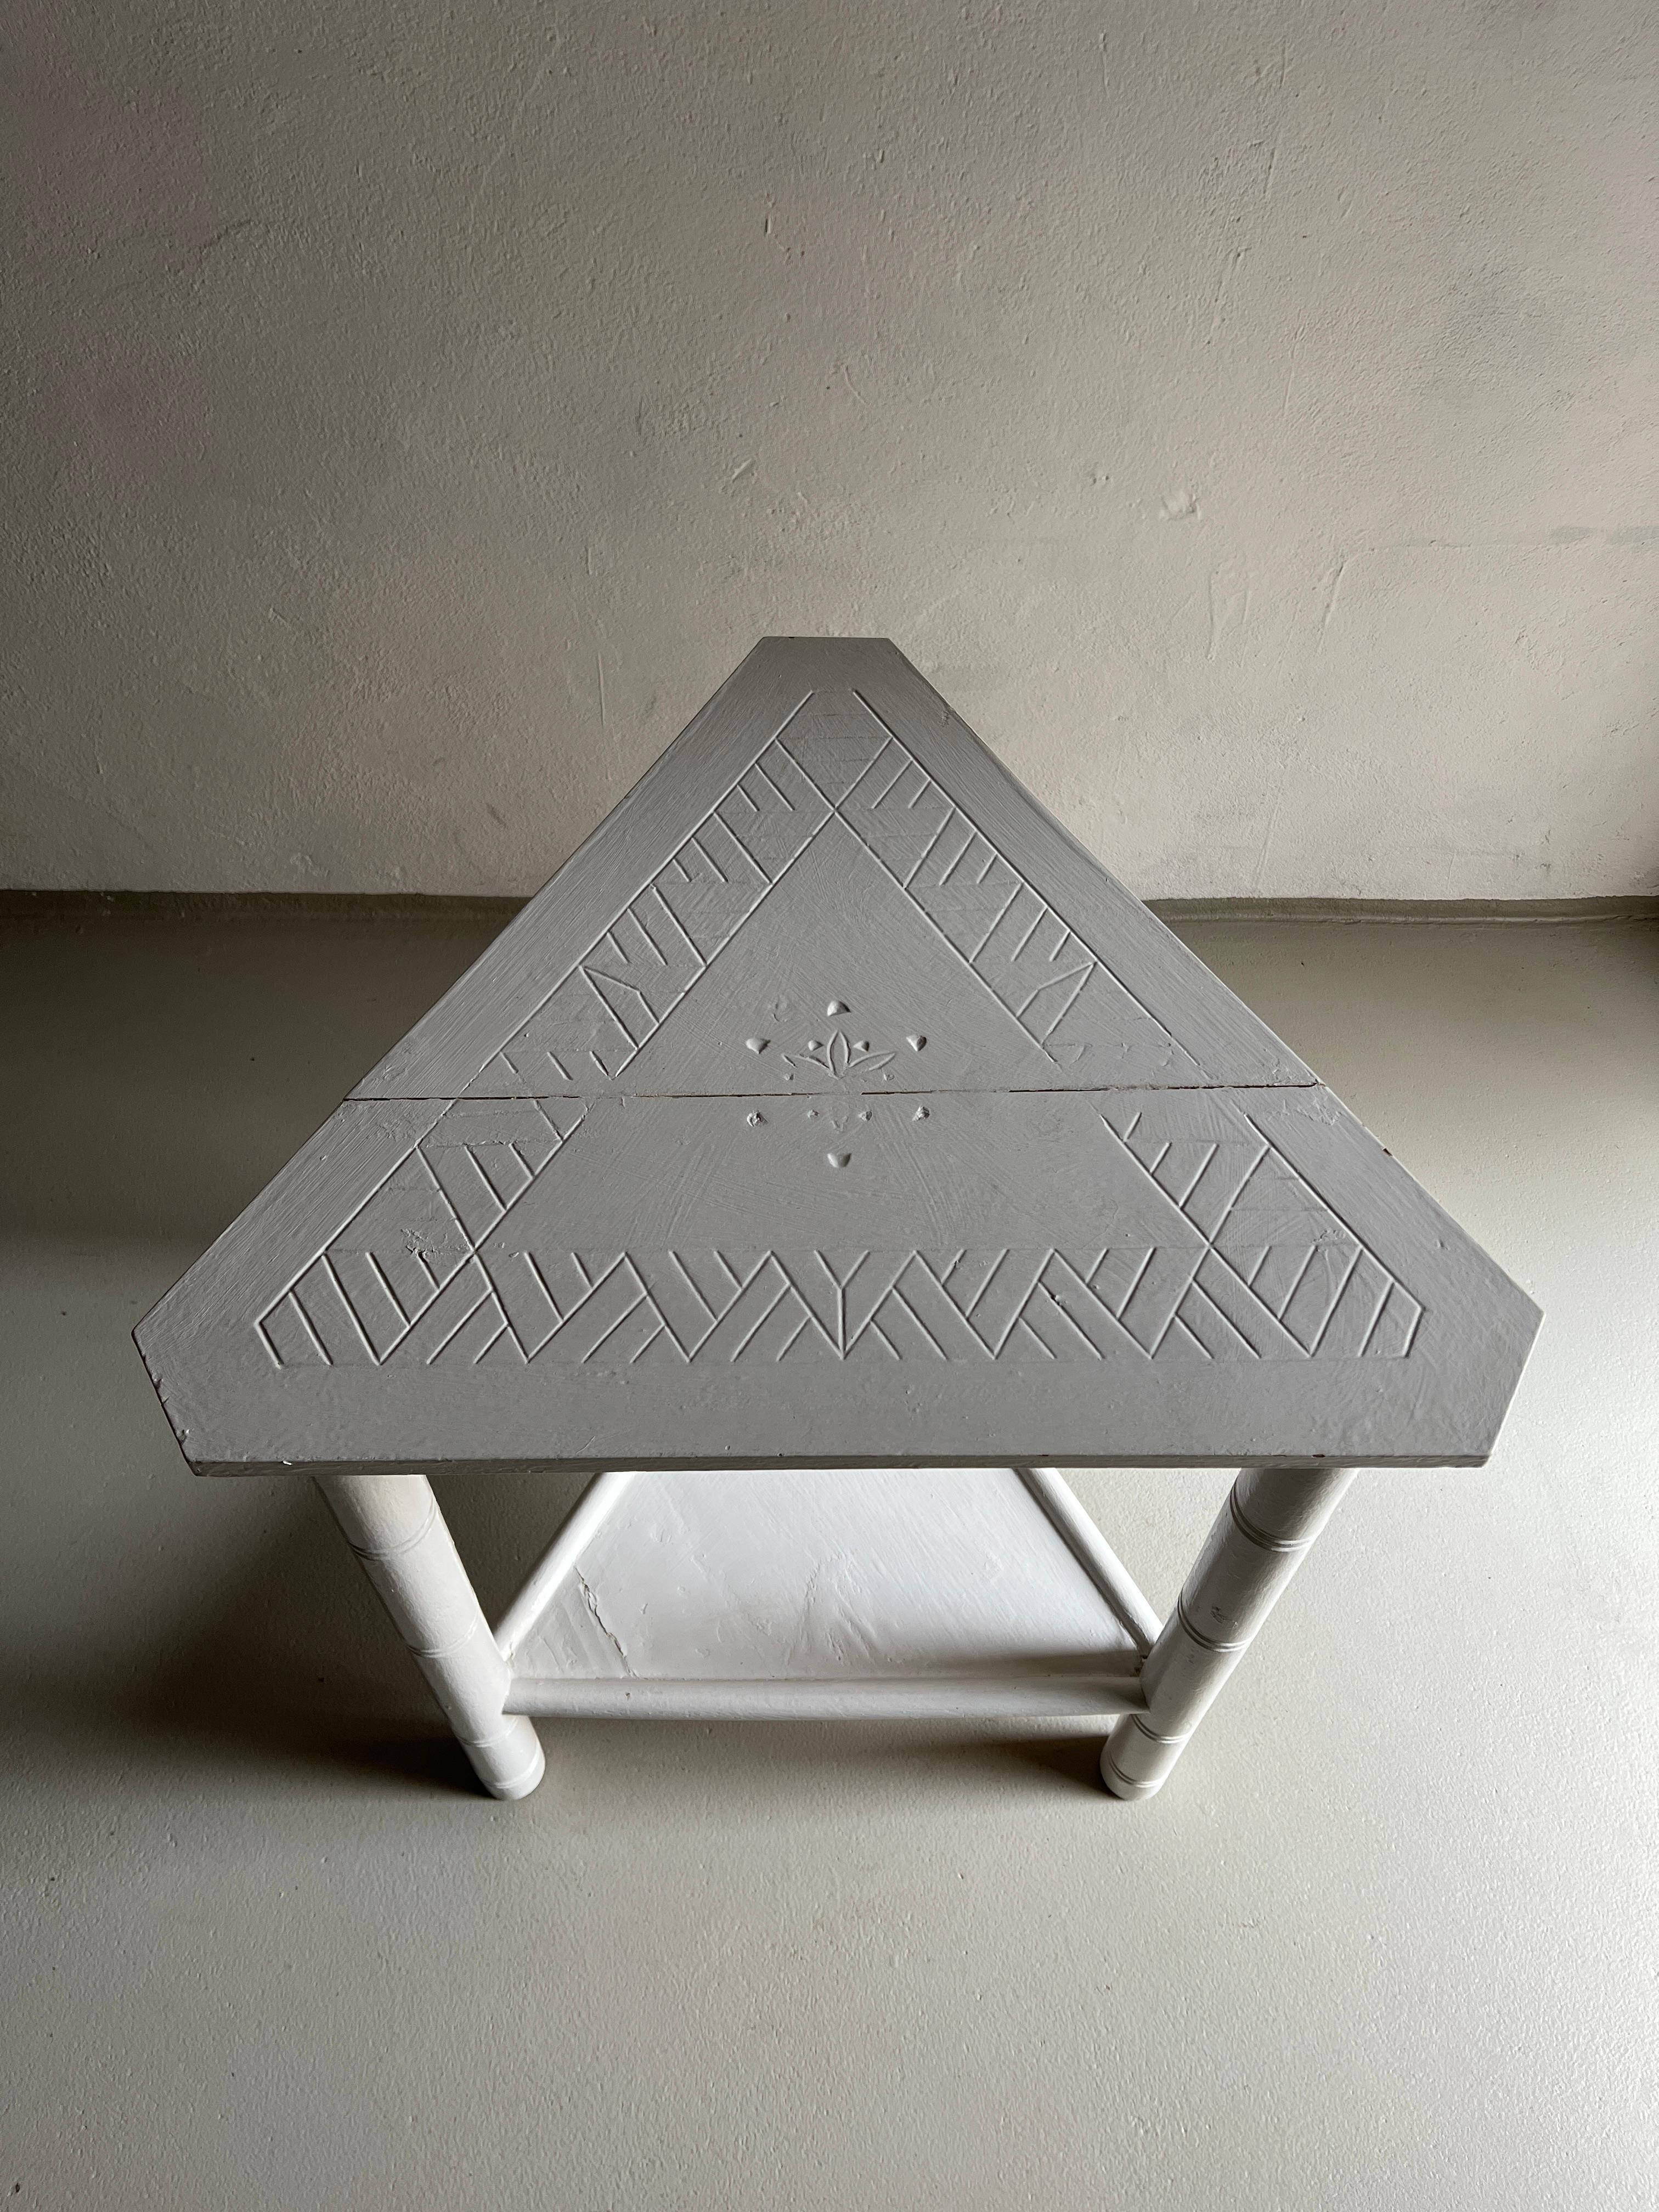 White-painted carved wood side table made of solid pine. 

Dimensions - H 74.5 cm, side 58.5 cm, corner cut 8 cm.